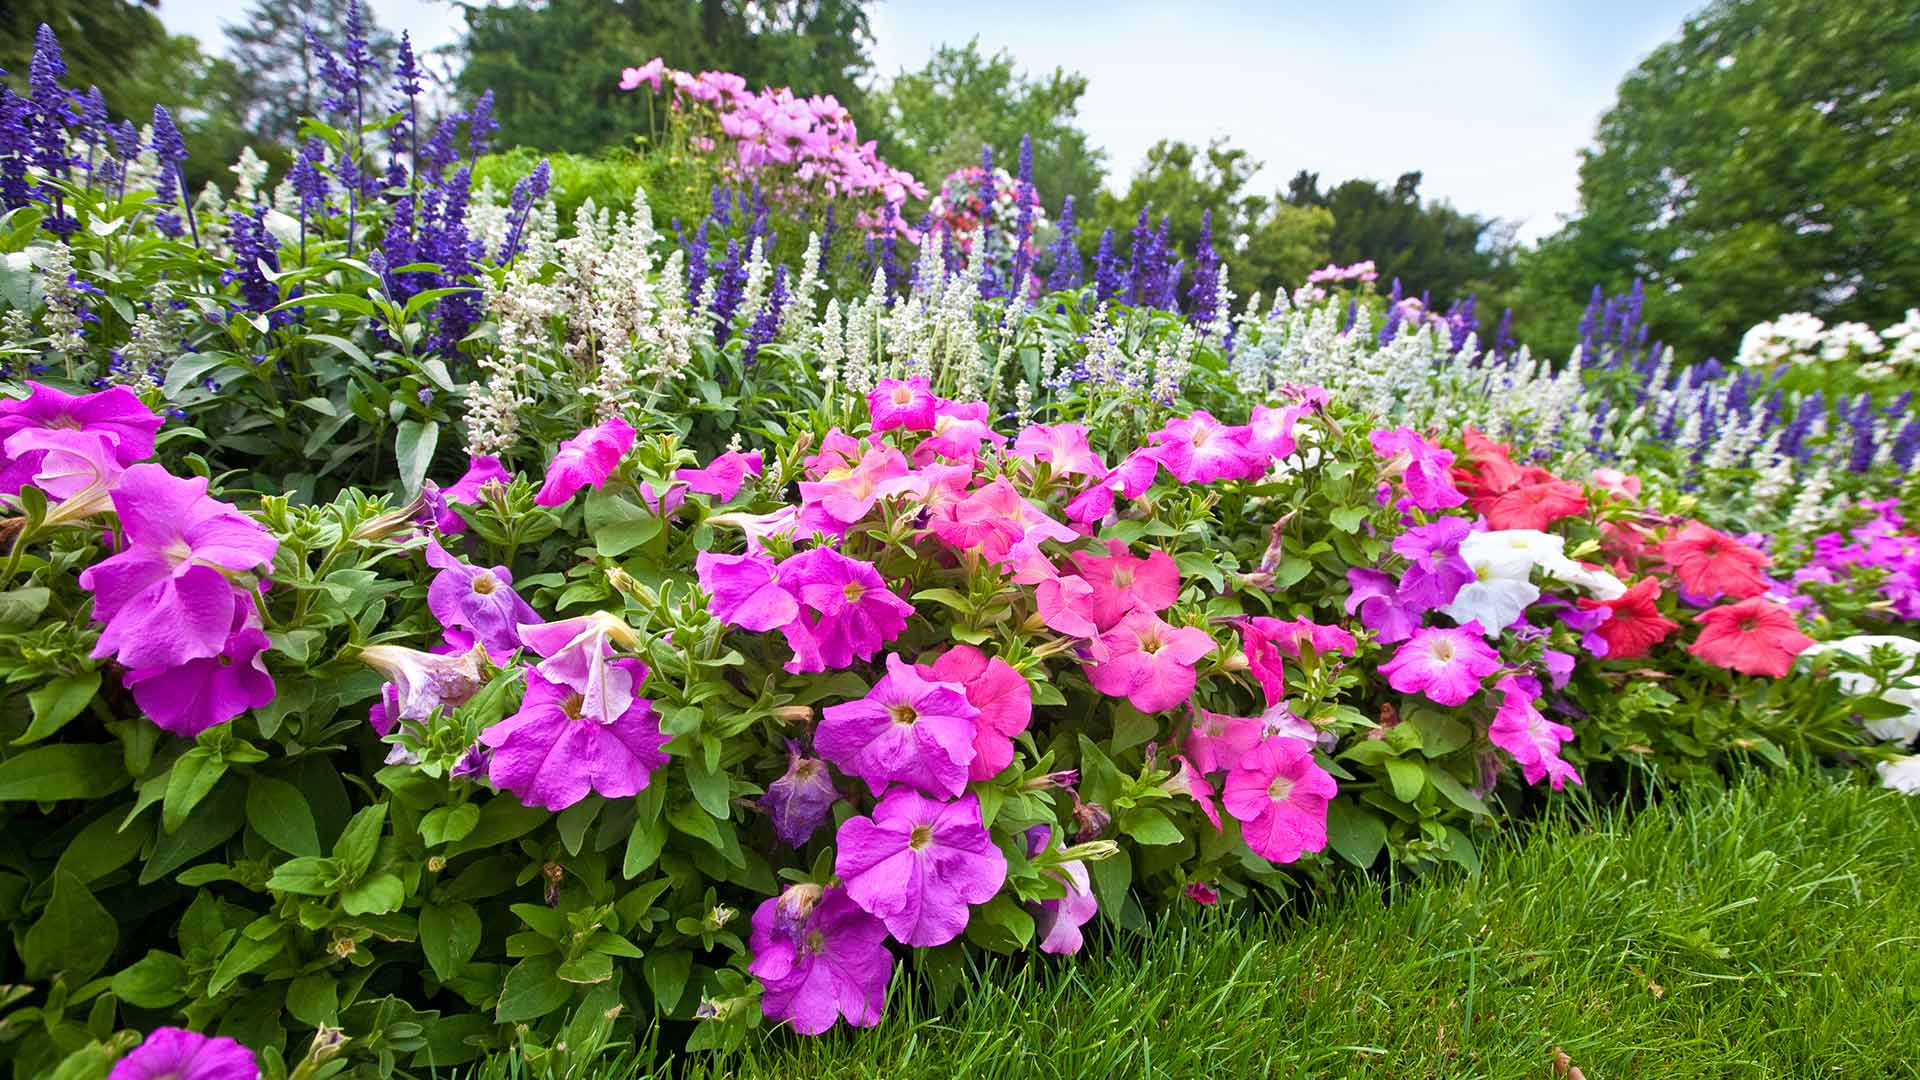 4 Things To Consider When Choosing Plants for Your Landscape Beds